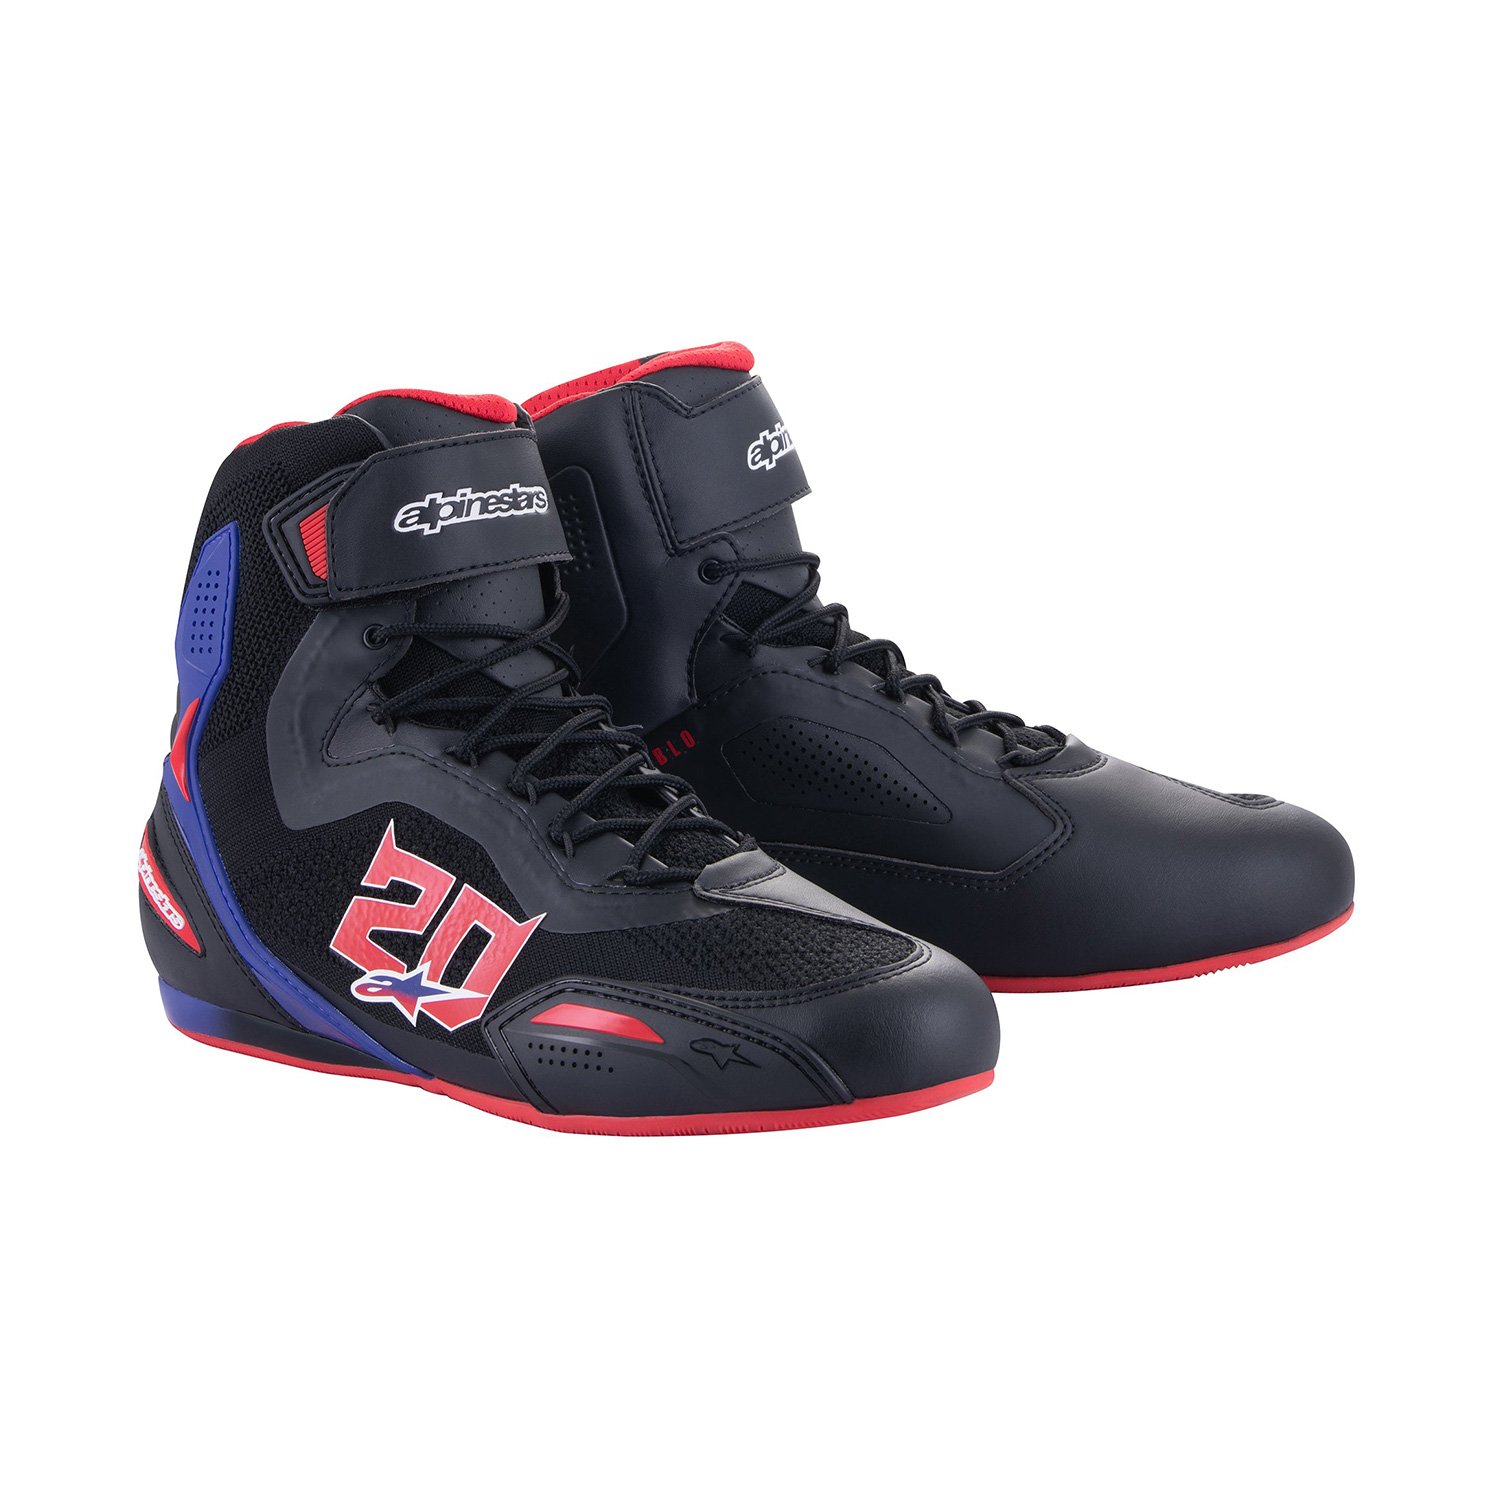 Image of Alpinestars FQ20 Faster-3 Rideknit Noir Bright Rouge Bleu Chaussures Taille US 85